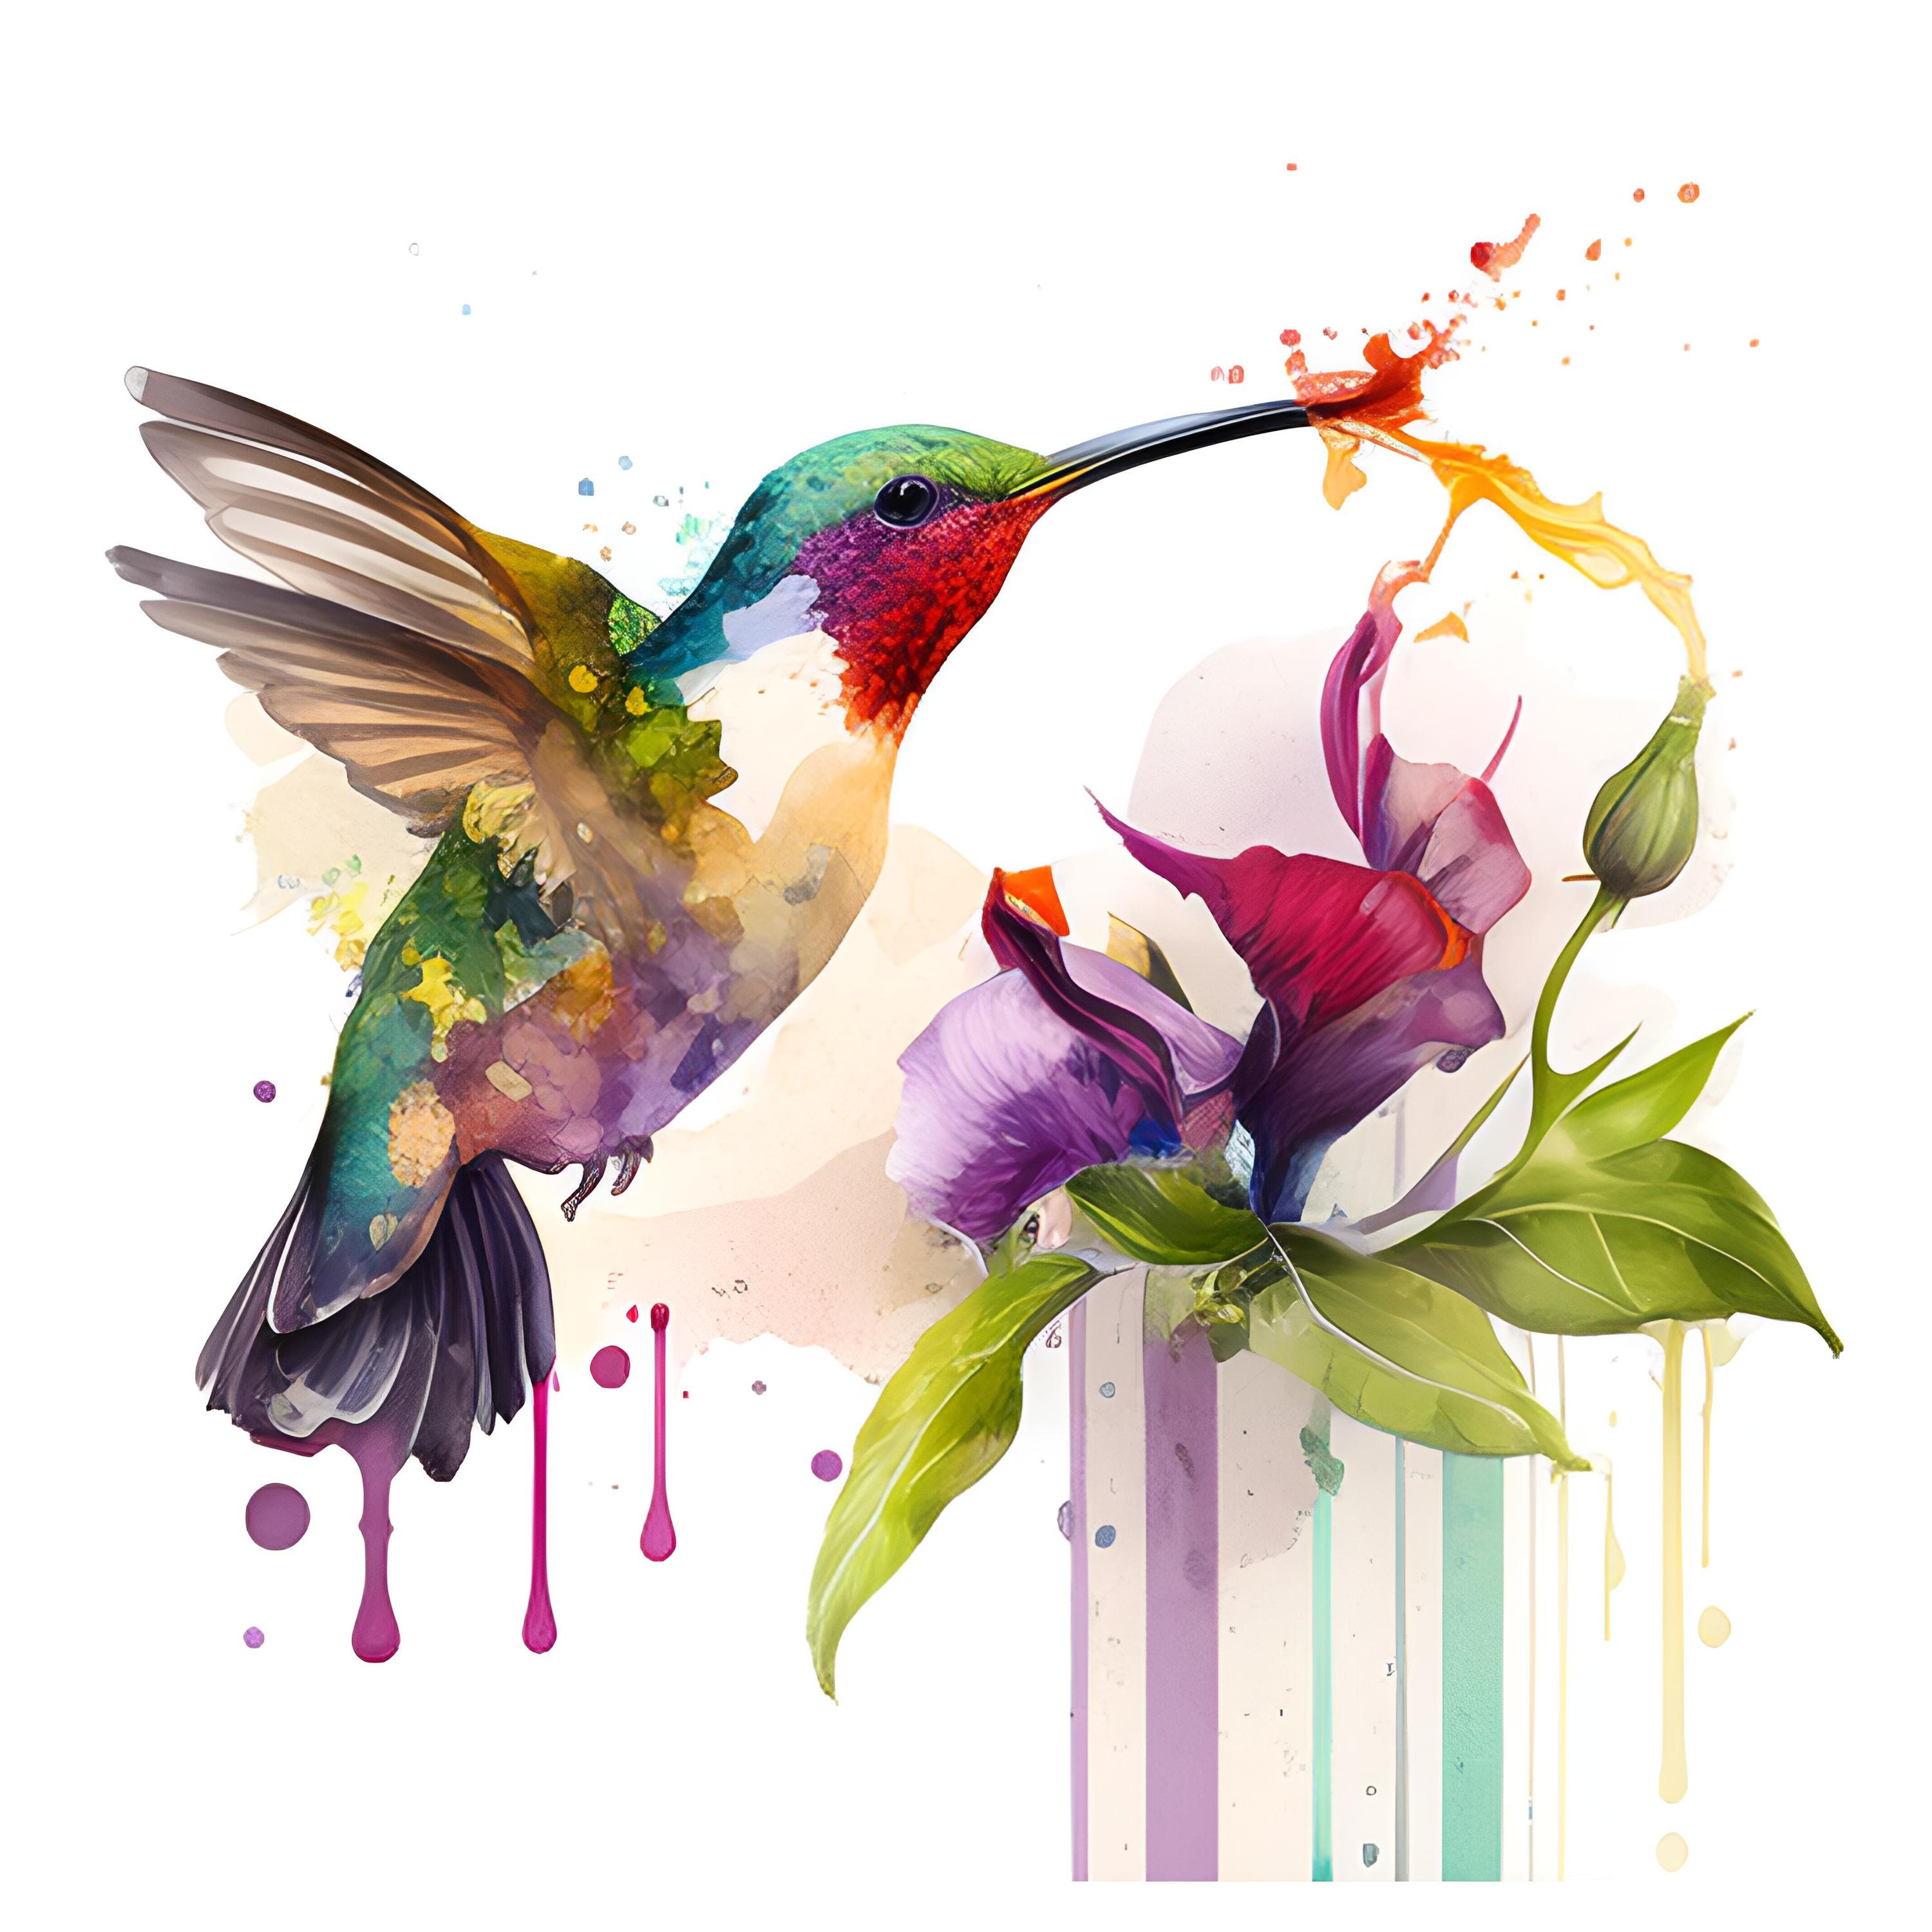 23+ Watercolor Backgrounds for Astonishing Websites - ColibriWP Blog